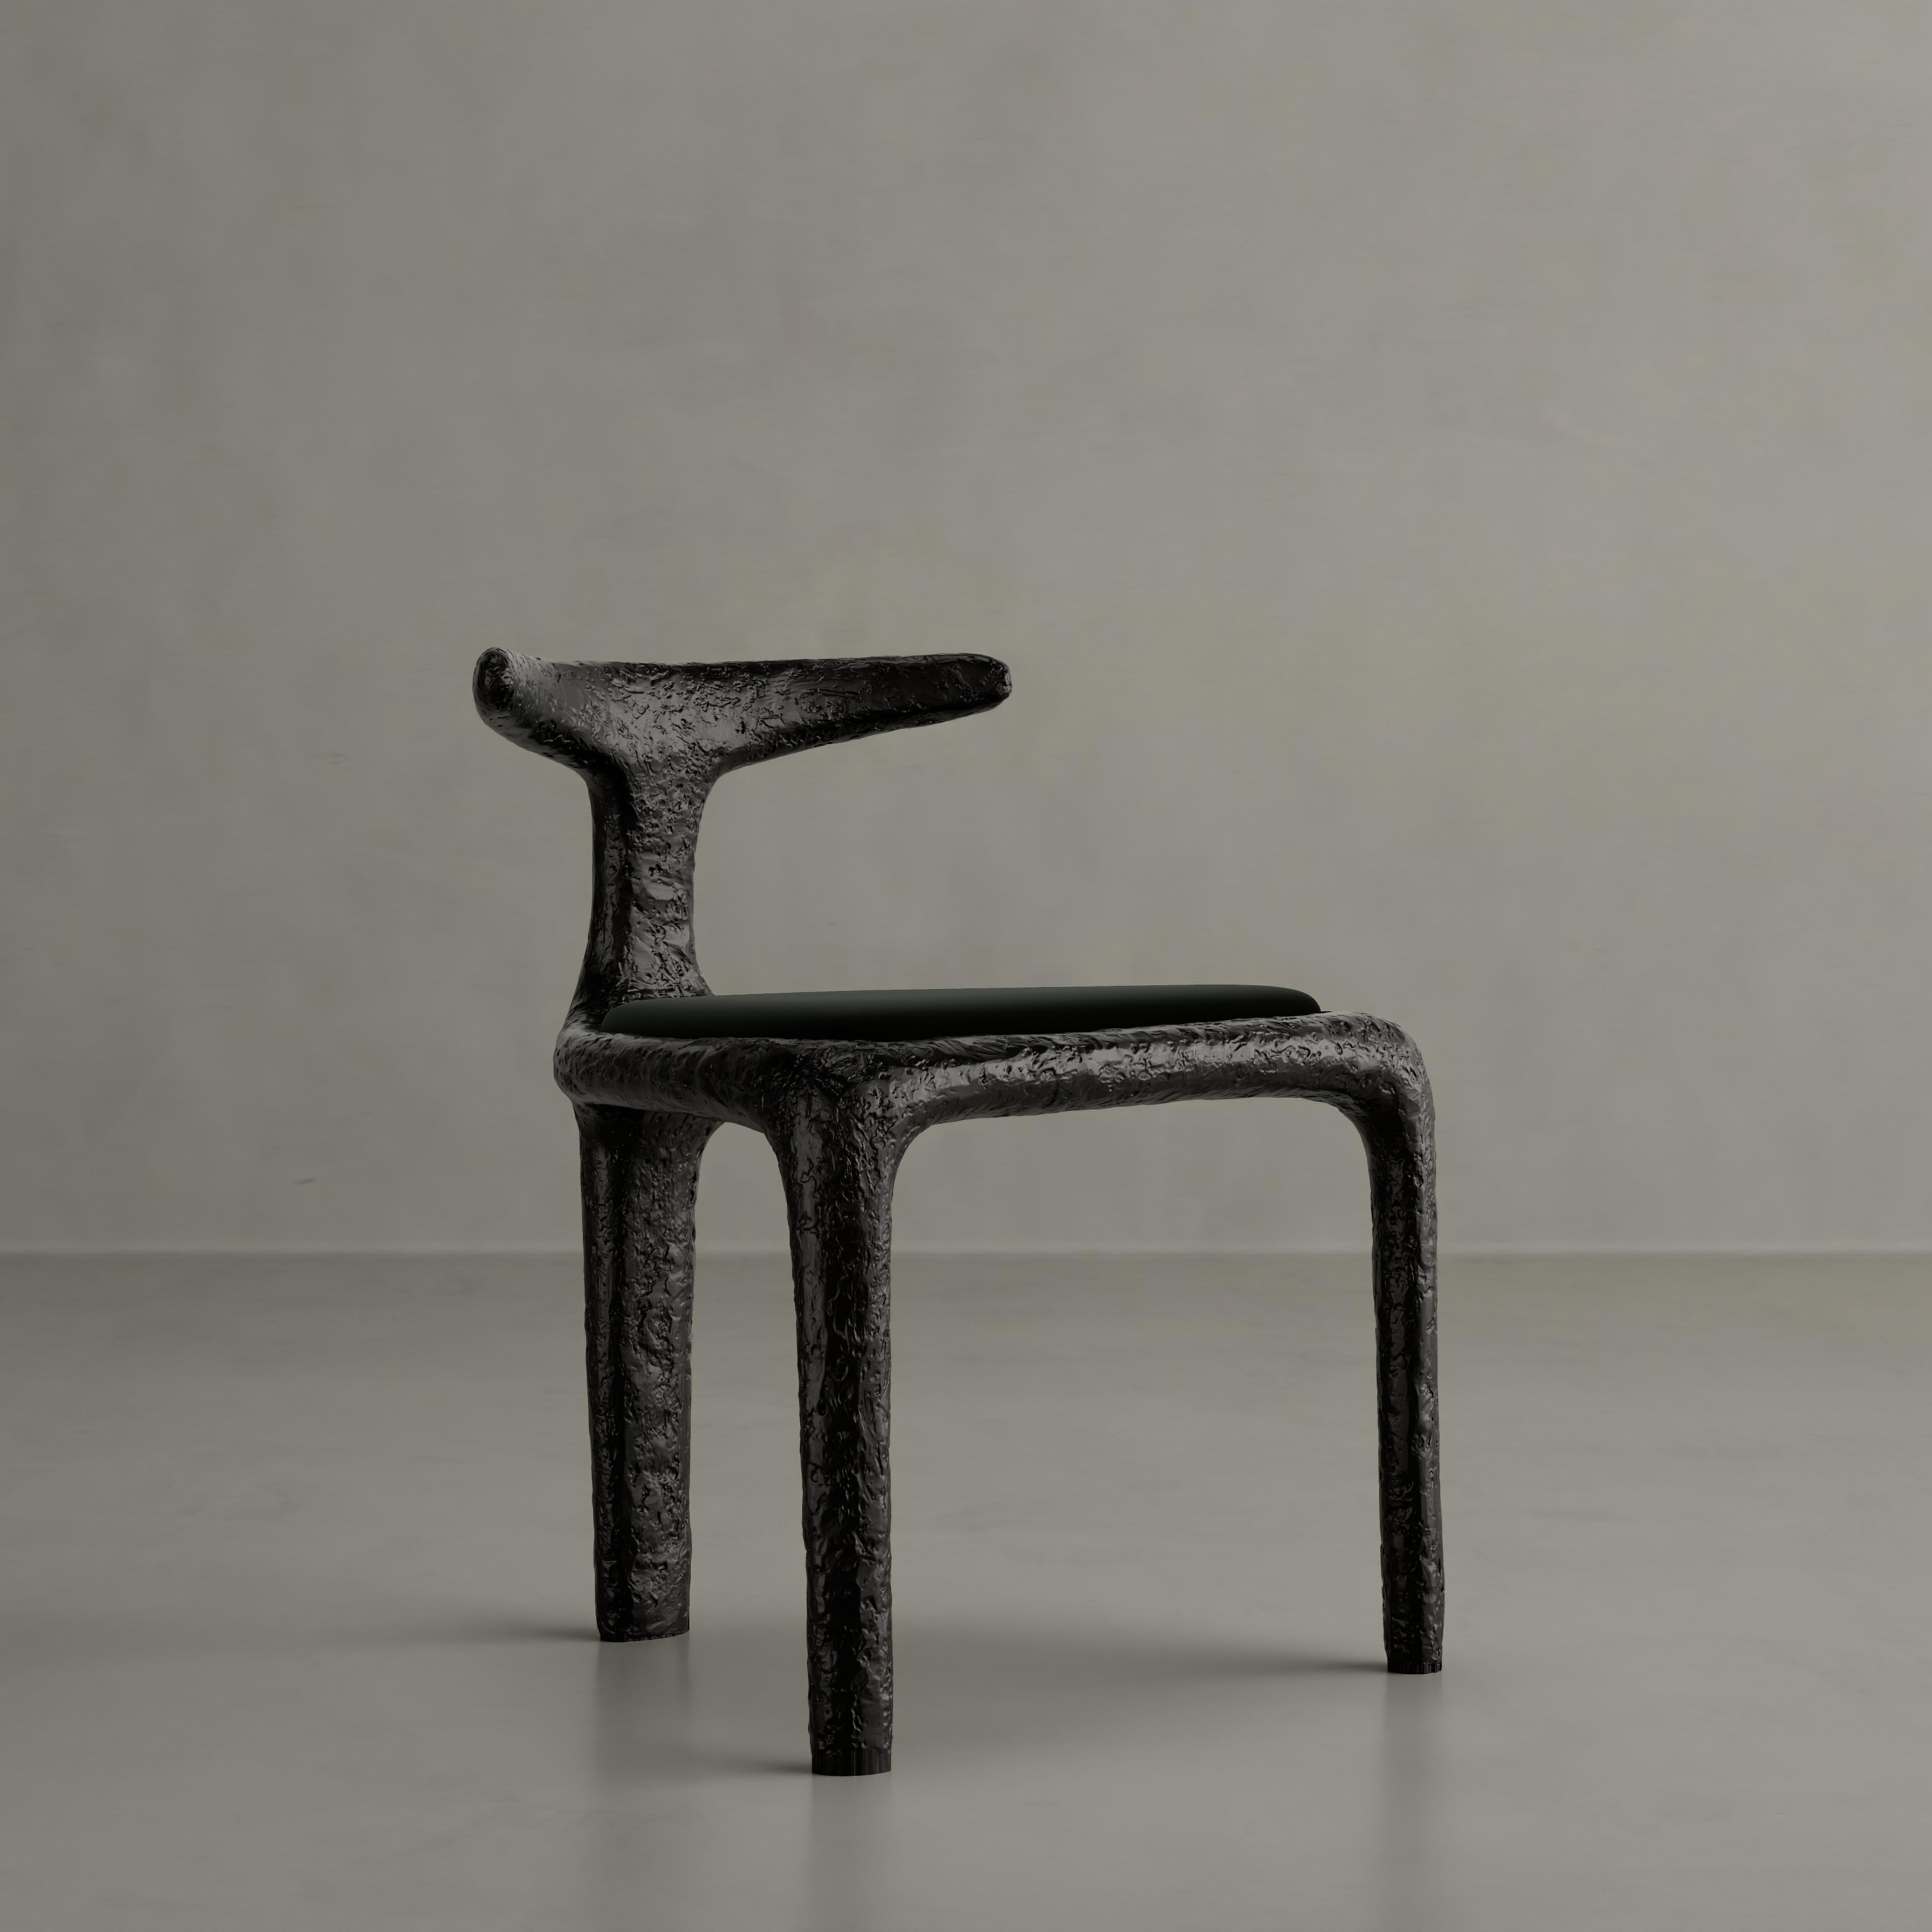 Ateliers Courbet | Triad Chair by Pieter Maes